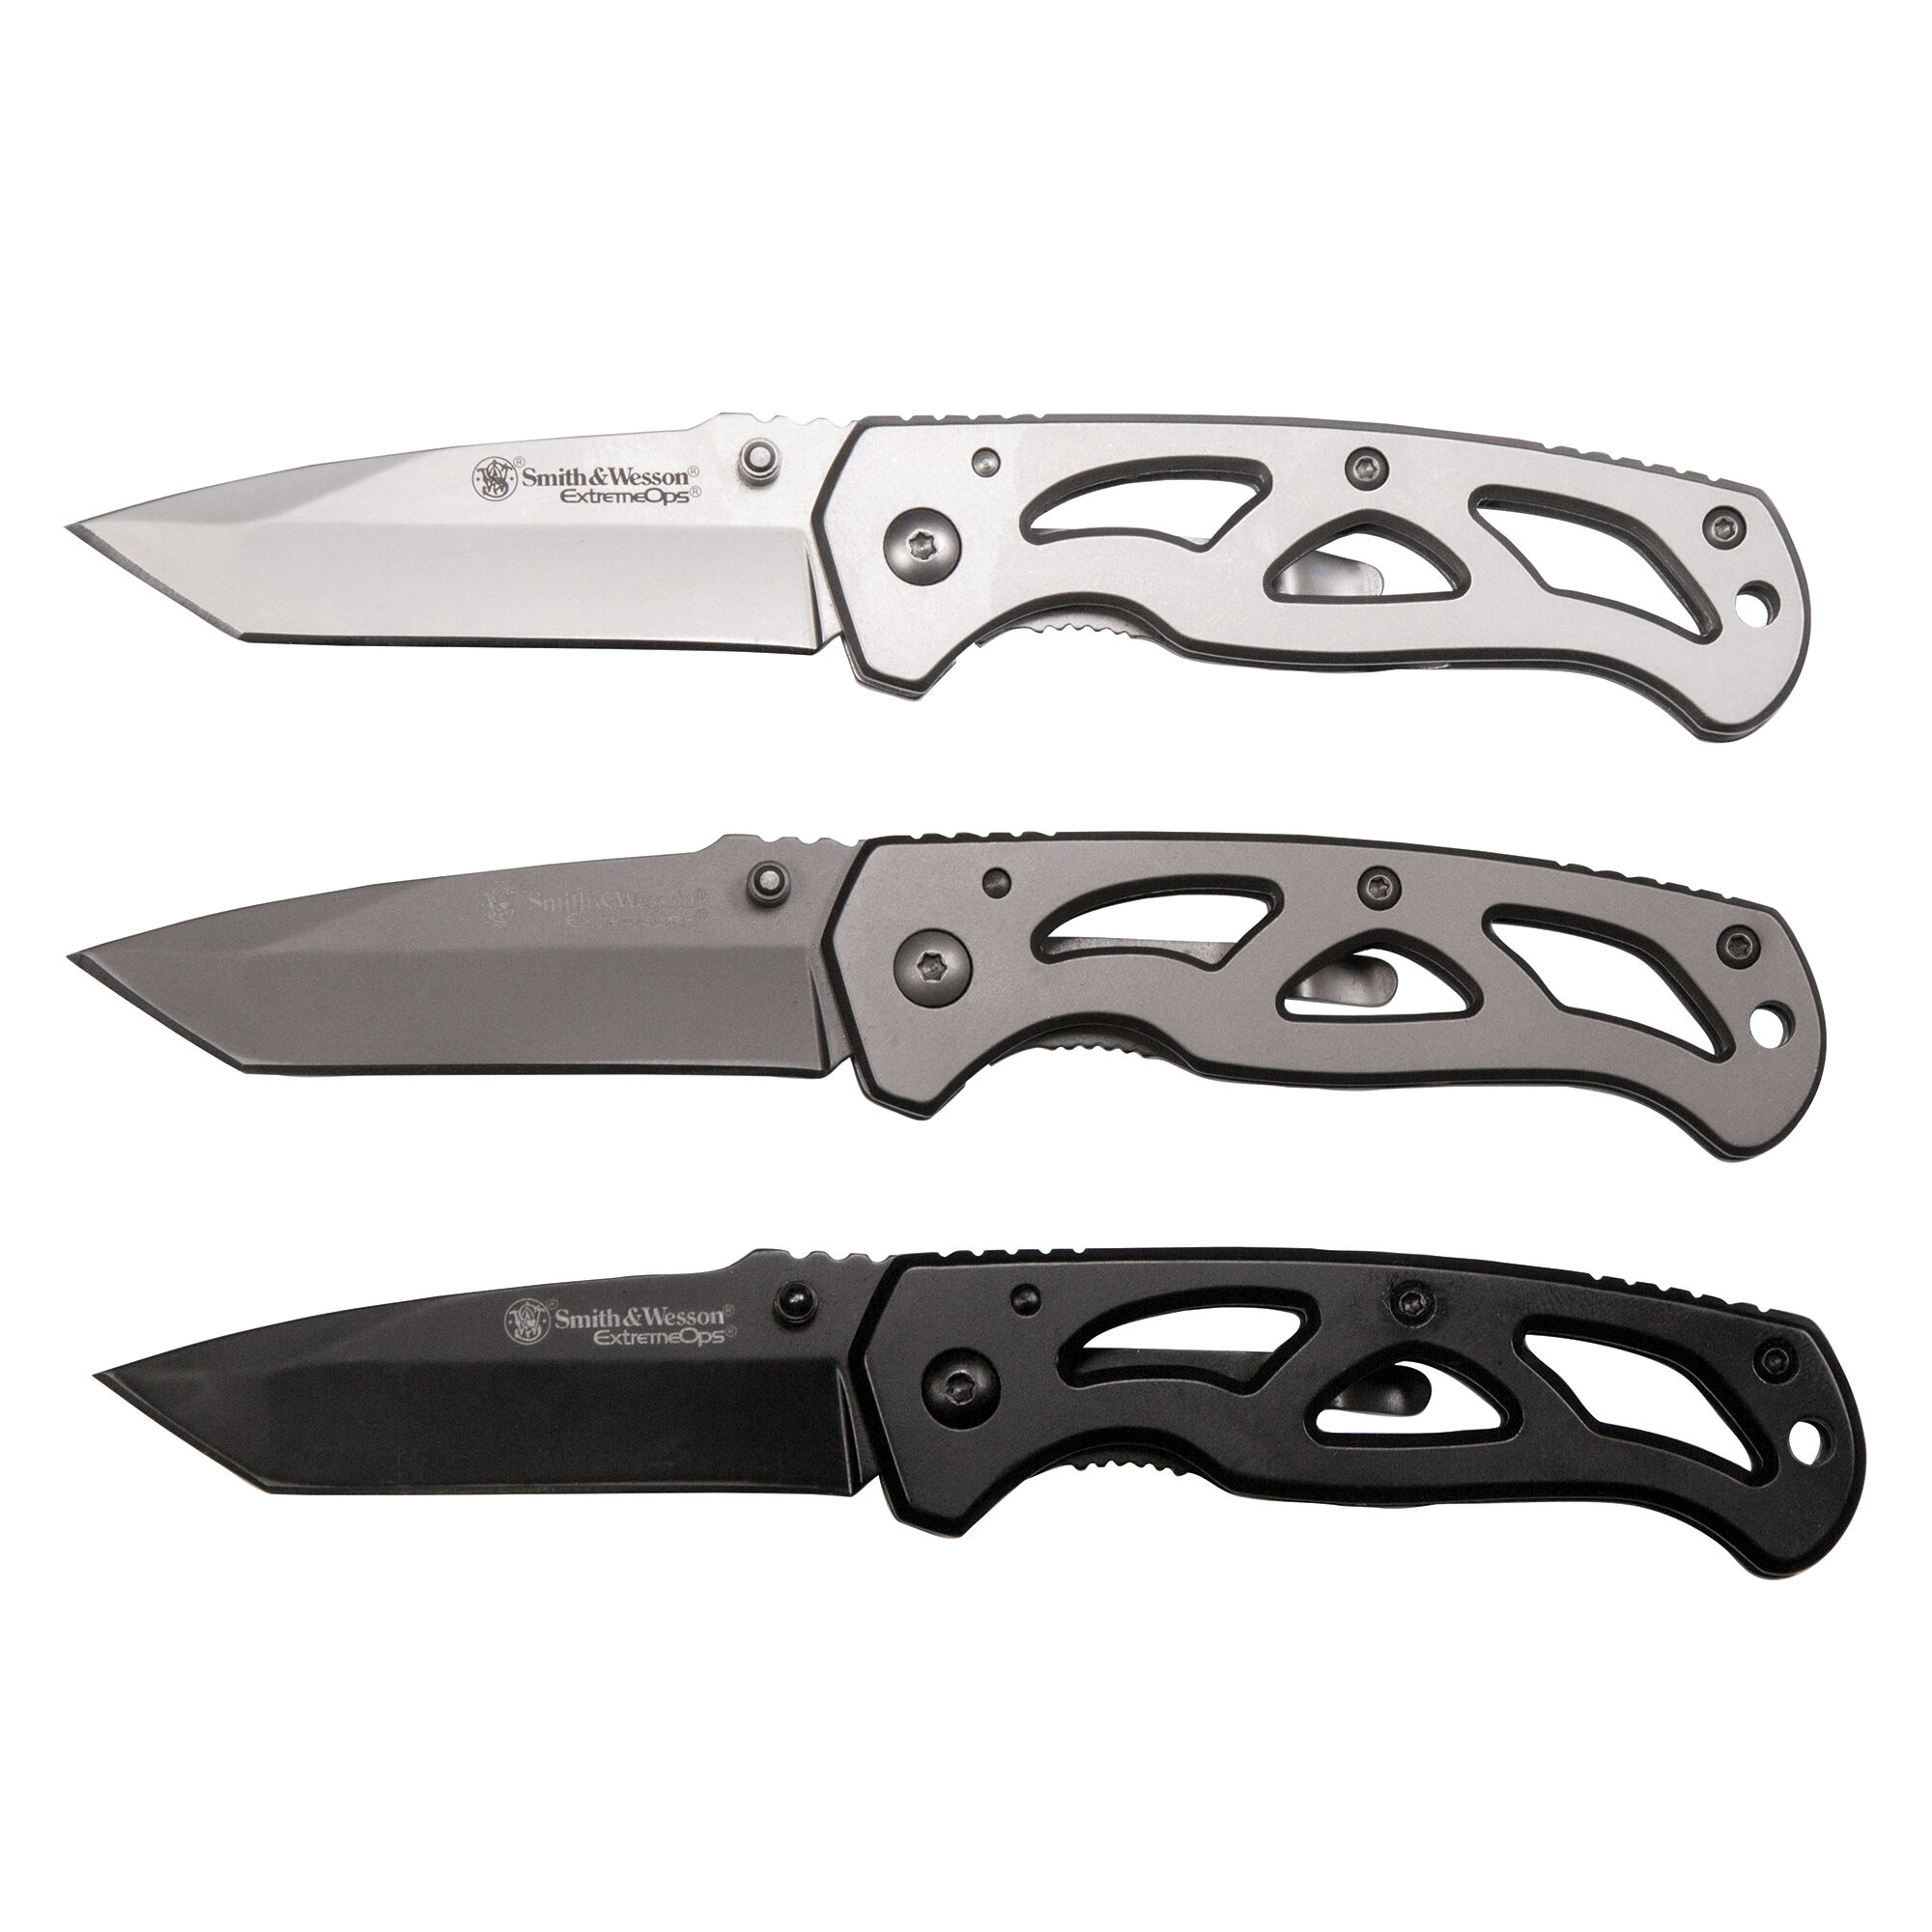 Smith & Wesson Extreme Ops CK404 Folding Knife Combo Pack | Overton's